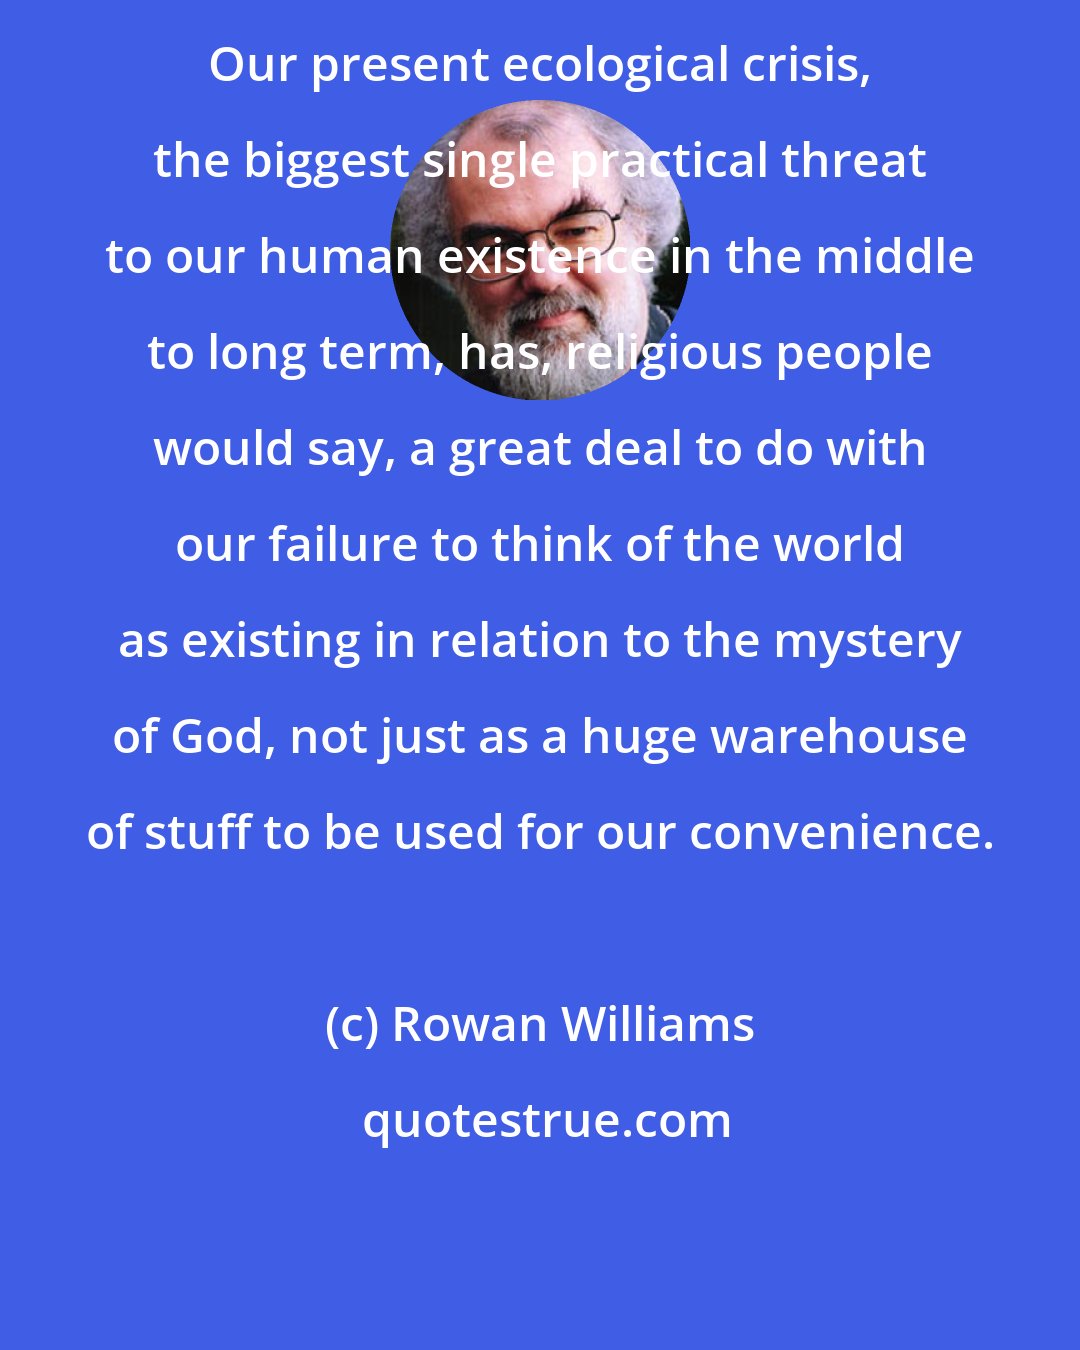 Rowan Williams: Our present ecological crisis, the biggest single practical threat to our human existence in the middle to long term, has, religious people would say, a great deal to do with our failure to think of the world as existing in relation to the mystery of God, not just as a huge warehouse of stuff to be used for our convenience.